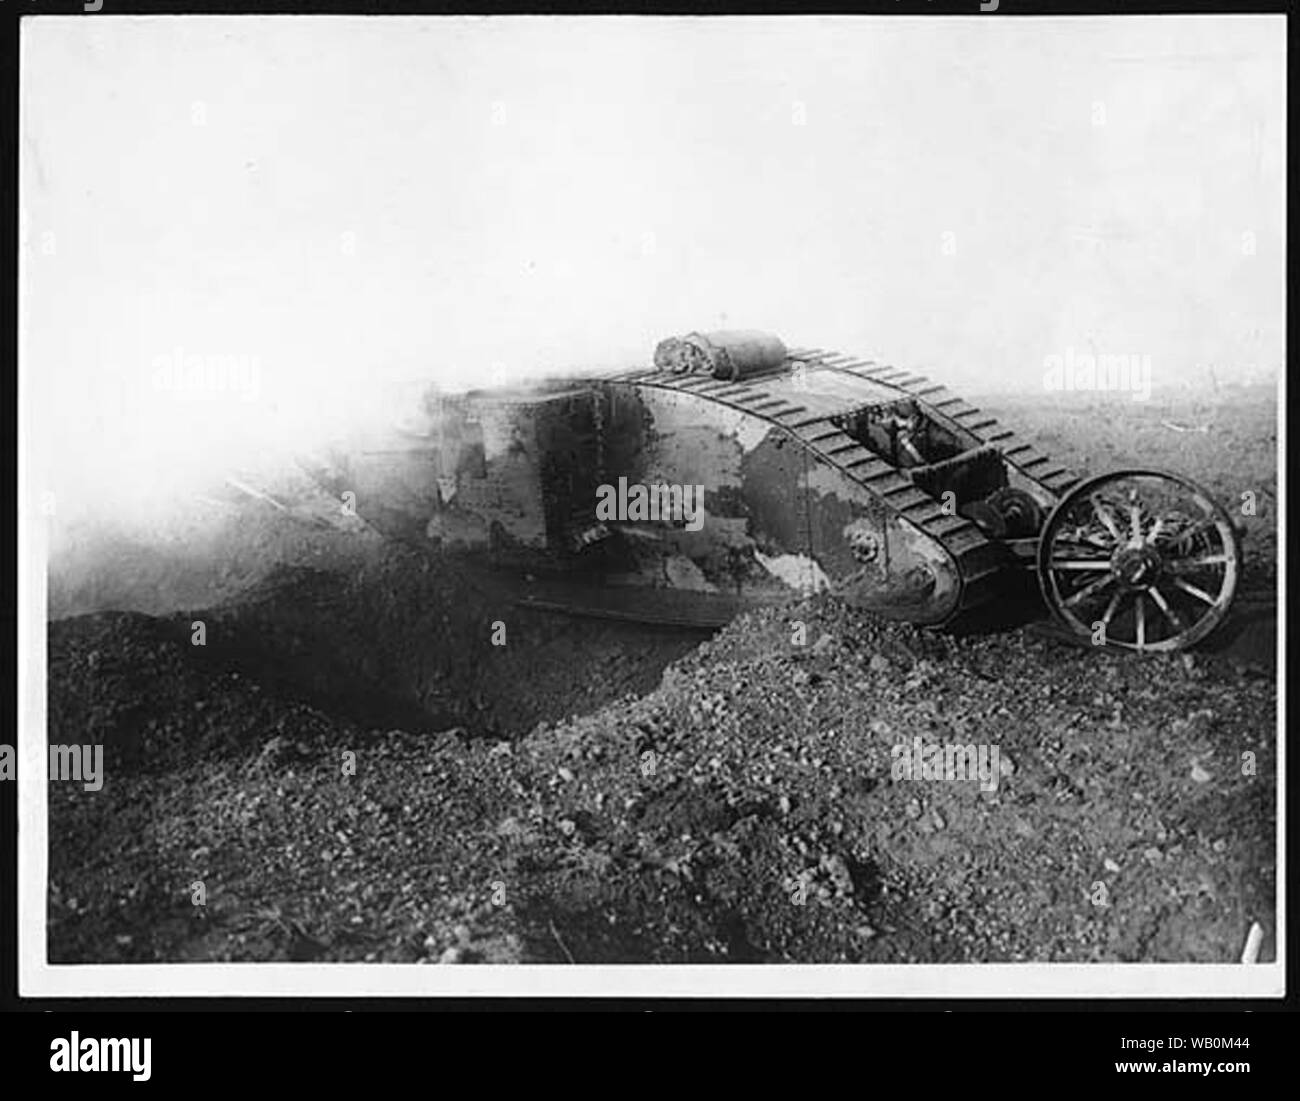 A tank, with guns apparently firing, crossing a trench or shell-hole. The tank appears to be a Mark I type, nicknamed, 'Mother'. These were the first tanks used in action and were developed from a prototype demonstrated in 1915, called 'Little Willie'. They were fitted with a 6-pound (2.7 kilos) naval gun on each side.  The tanks were first used, rather unsuccessfully, at Flers-Coucelette on 15 September 1916. However, Sir Douglas Haig (1861-1928) was sufficiently impressed with their potential to order more tanks to be supplied and as the war continued new tactics were developed which establi Stock Photo